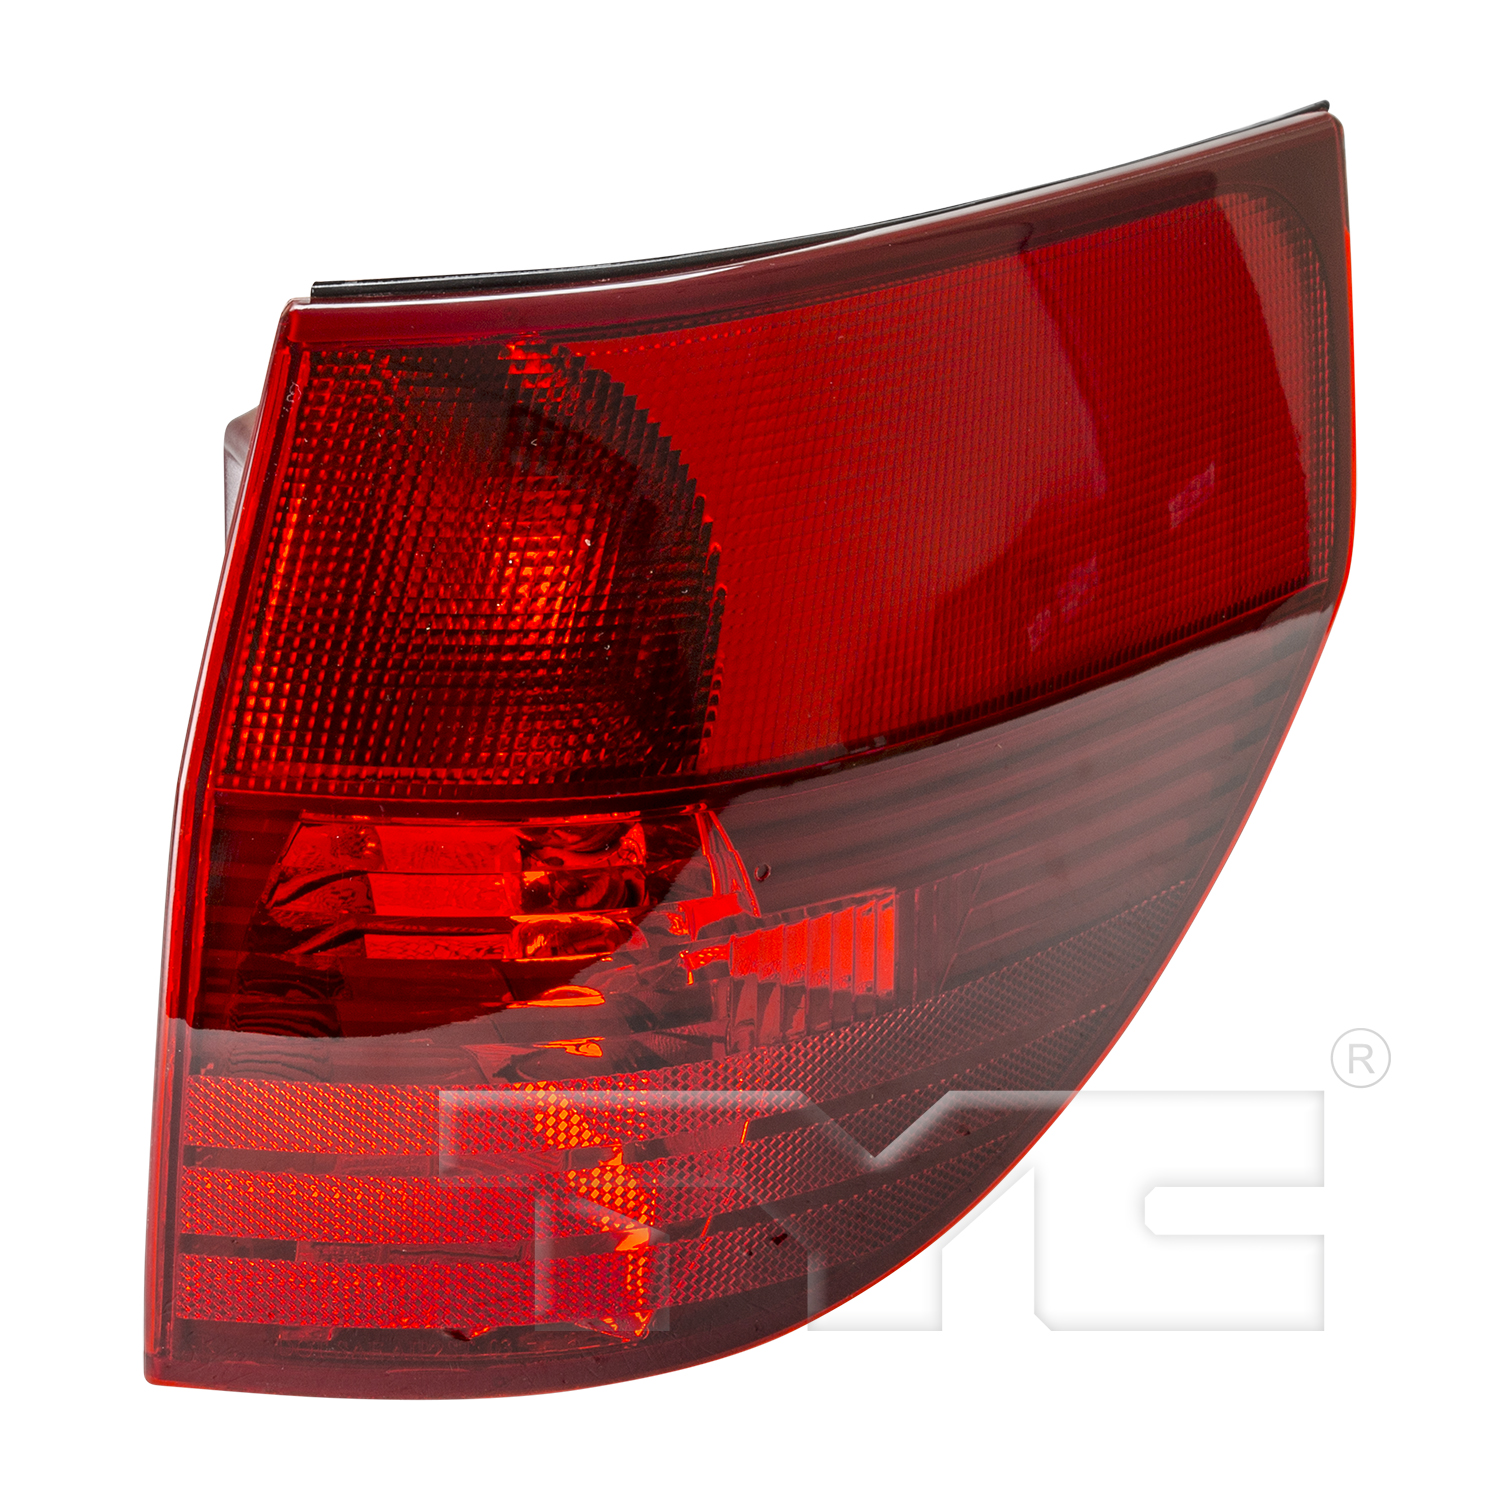 Aftermarket TAILLIGHTS for TOYOTA - SIENNA, SIENNA,04-05,RT Taillamp assy